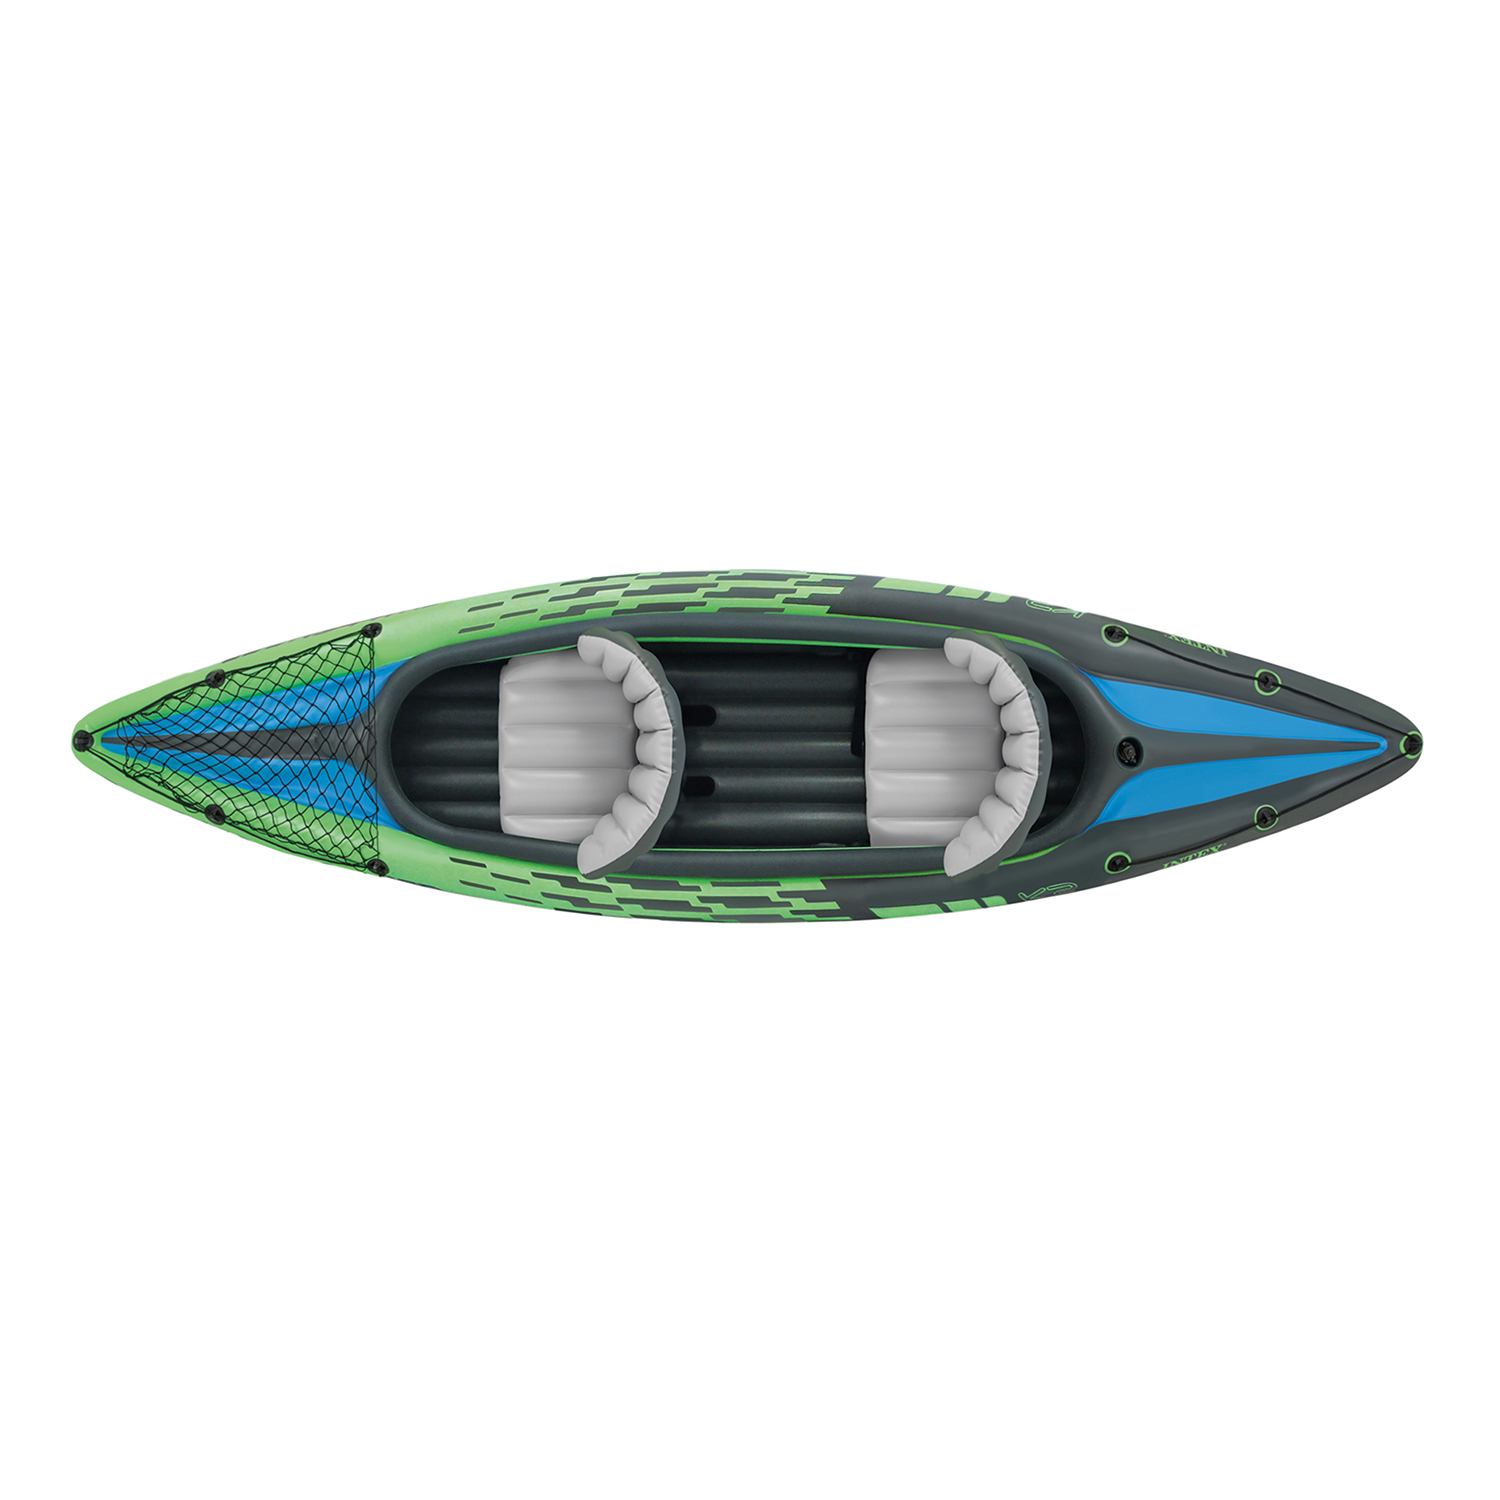 Intex Challenger K2 Inflatable Kayak with Oars and Hand Pump - image 2 of 8